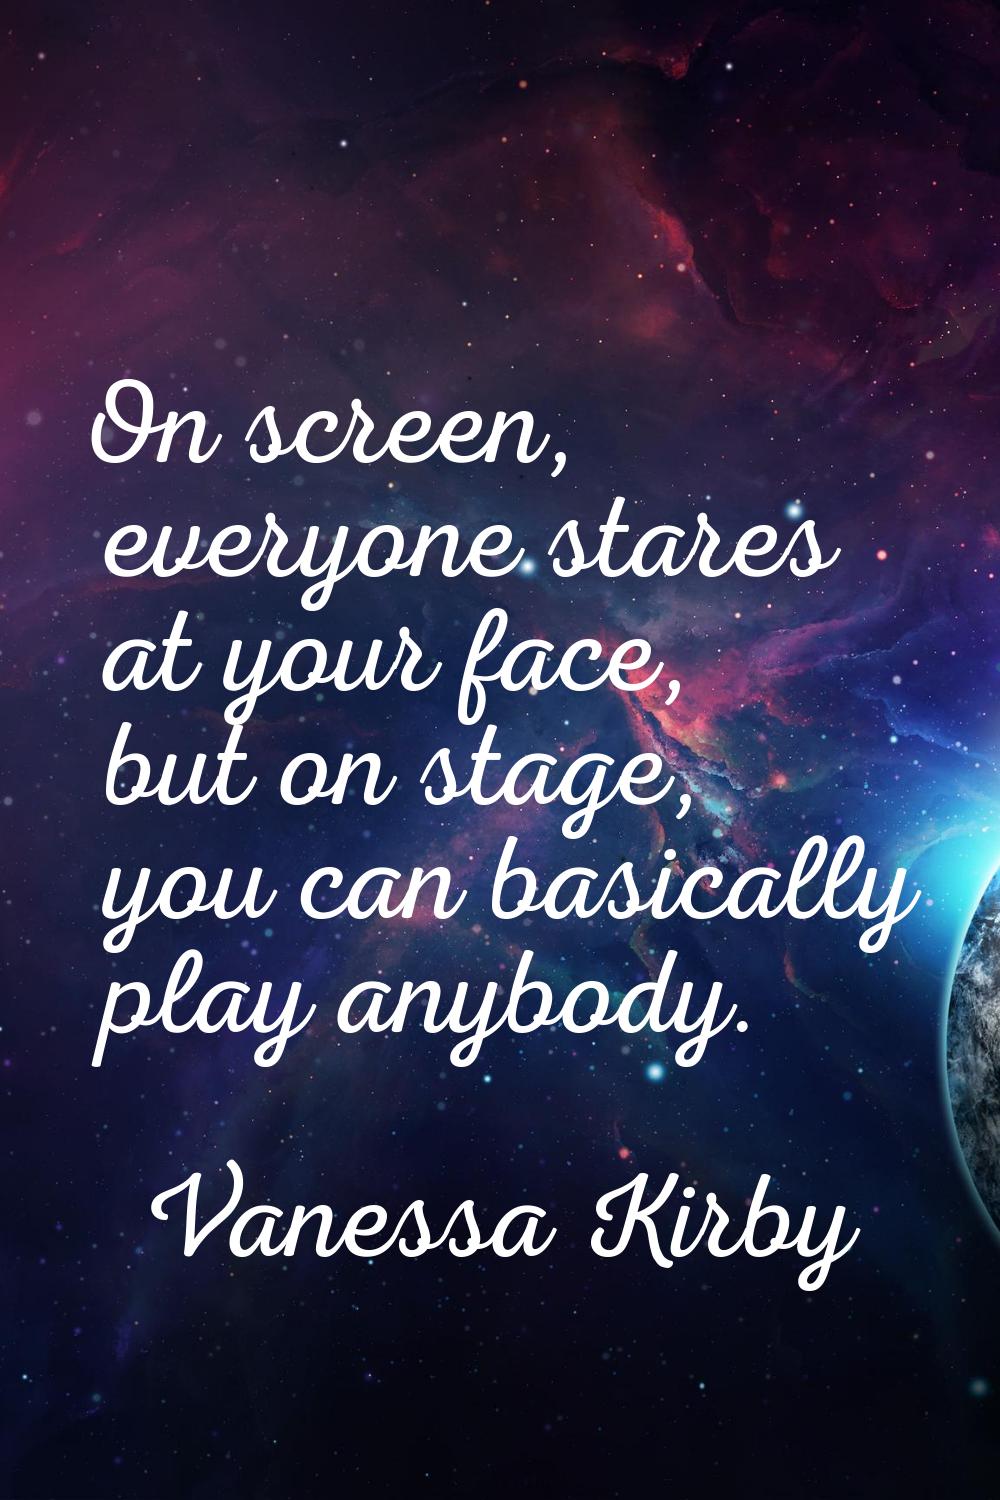 On screen, everyone stares at your face, but on stage, you can basically play anybody.